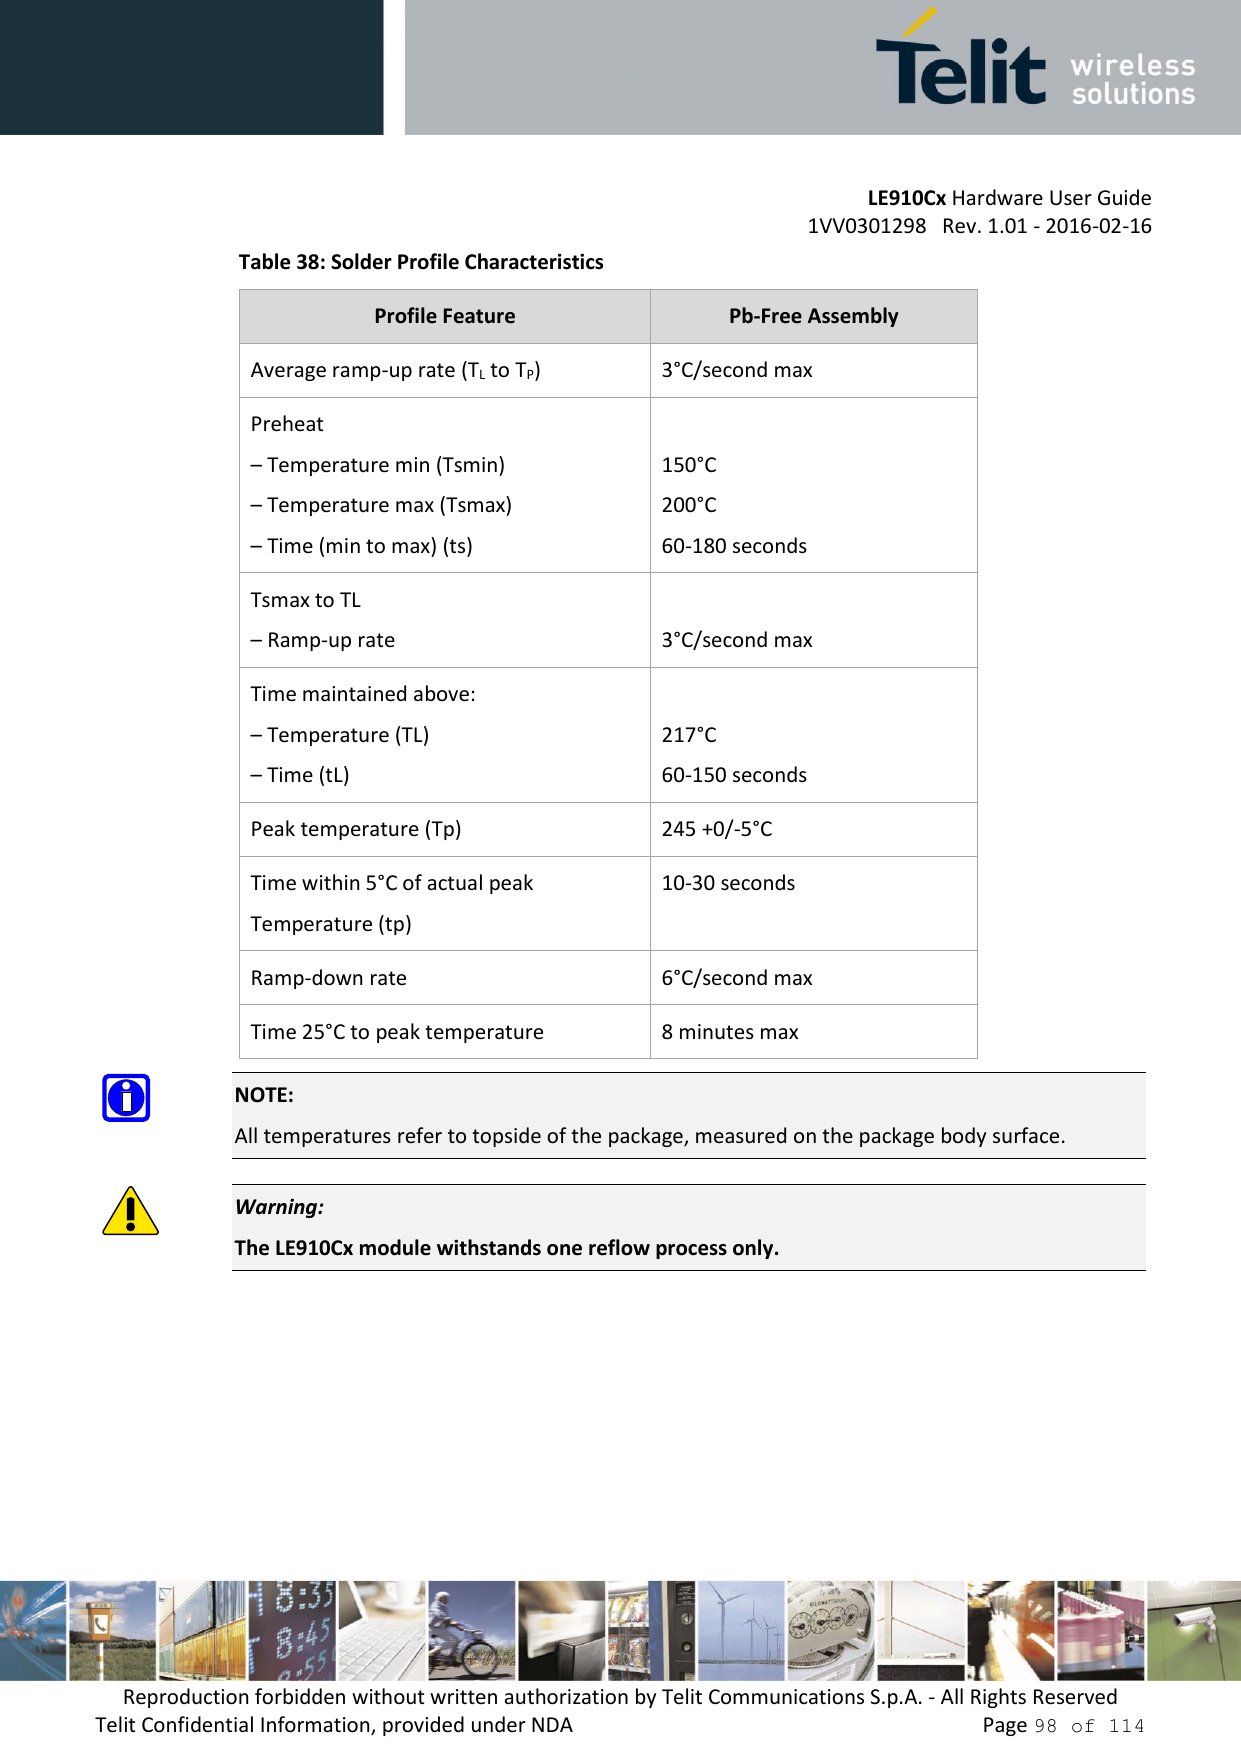 LE910Cx Hardware User Guide 1VV0301298   Rev. 1.01 - 2016-02-16 Reproduction forbidden without written authorization by Telit Communications S.p.A. - All Rights Reserved Telit Confidential Information, provided under NDA   Page 98 of 114 Table 38: Solder Profile Characteristics Profile Feature Pb-Free Assembly Average ramp-up rate (TL to TP) 3°C/second max Preheat –Temperature min (Tsmin)–Temperature max (Tsmax)–Time (min to max) (ts)150°C 200°C 60-180 seconds Tsmax to TL –Ramp-up rate3°C/second max Time maintained above: –Temperature (TL)–Time (tL)217°C 60-150 seconds Peak temperature (Tp) 245 +0/-5°C Time within 5°C of actual peak Temperature (tp) 10-30 seconds Ramp-down rate 6°C/second max Time 25°C to peak temperature 8 minutes max NOTE: All temperatures refer to topside of the package, measured on the package body surface. Warning: The LE910Cx module withstands one reflow process only. 